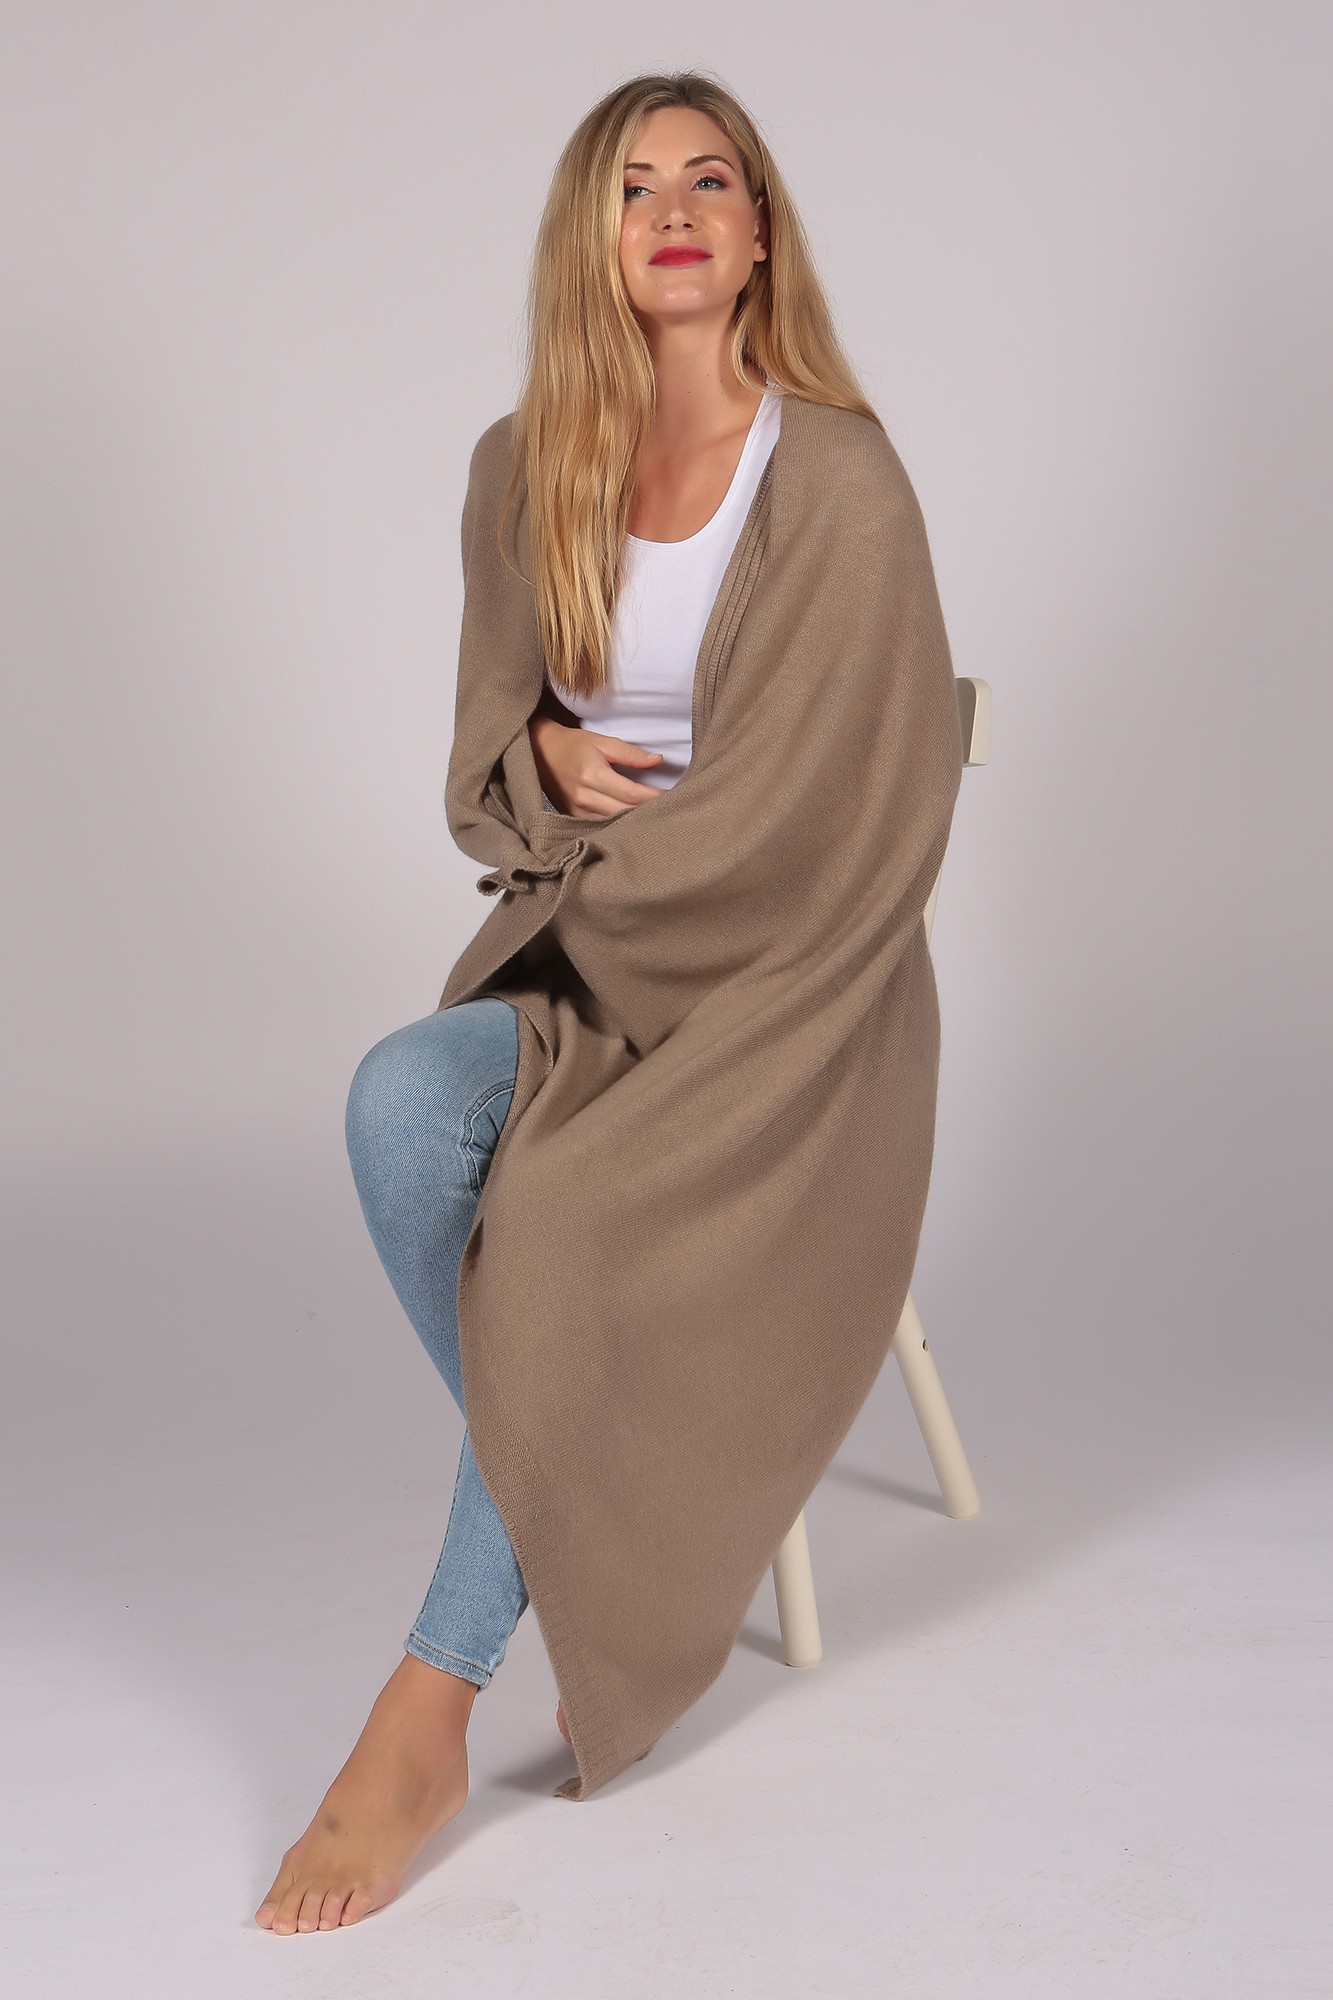 Luxury Pure Cashmere Cable Knit Blanket Throw